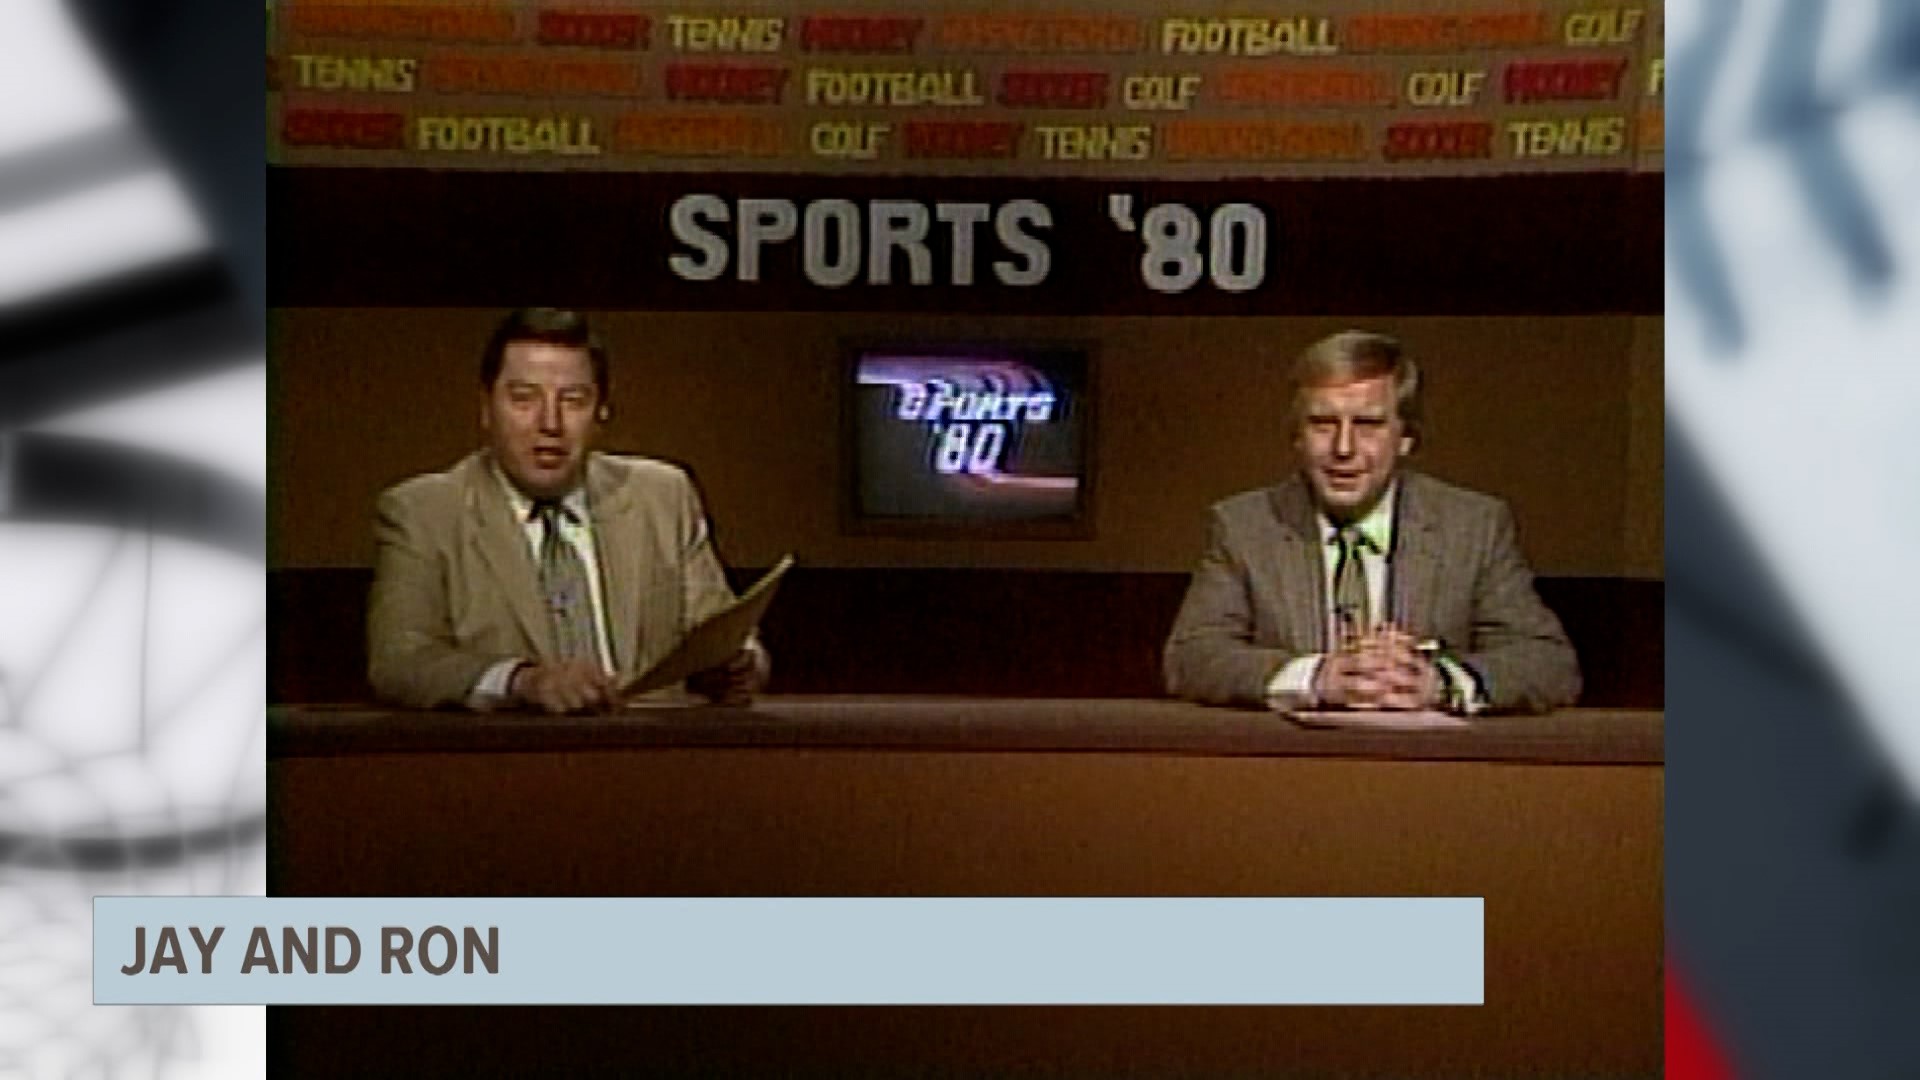 We take a special look back at 75 years of sportscasting at 5 On Your Side, and catch up with some familiar faces.